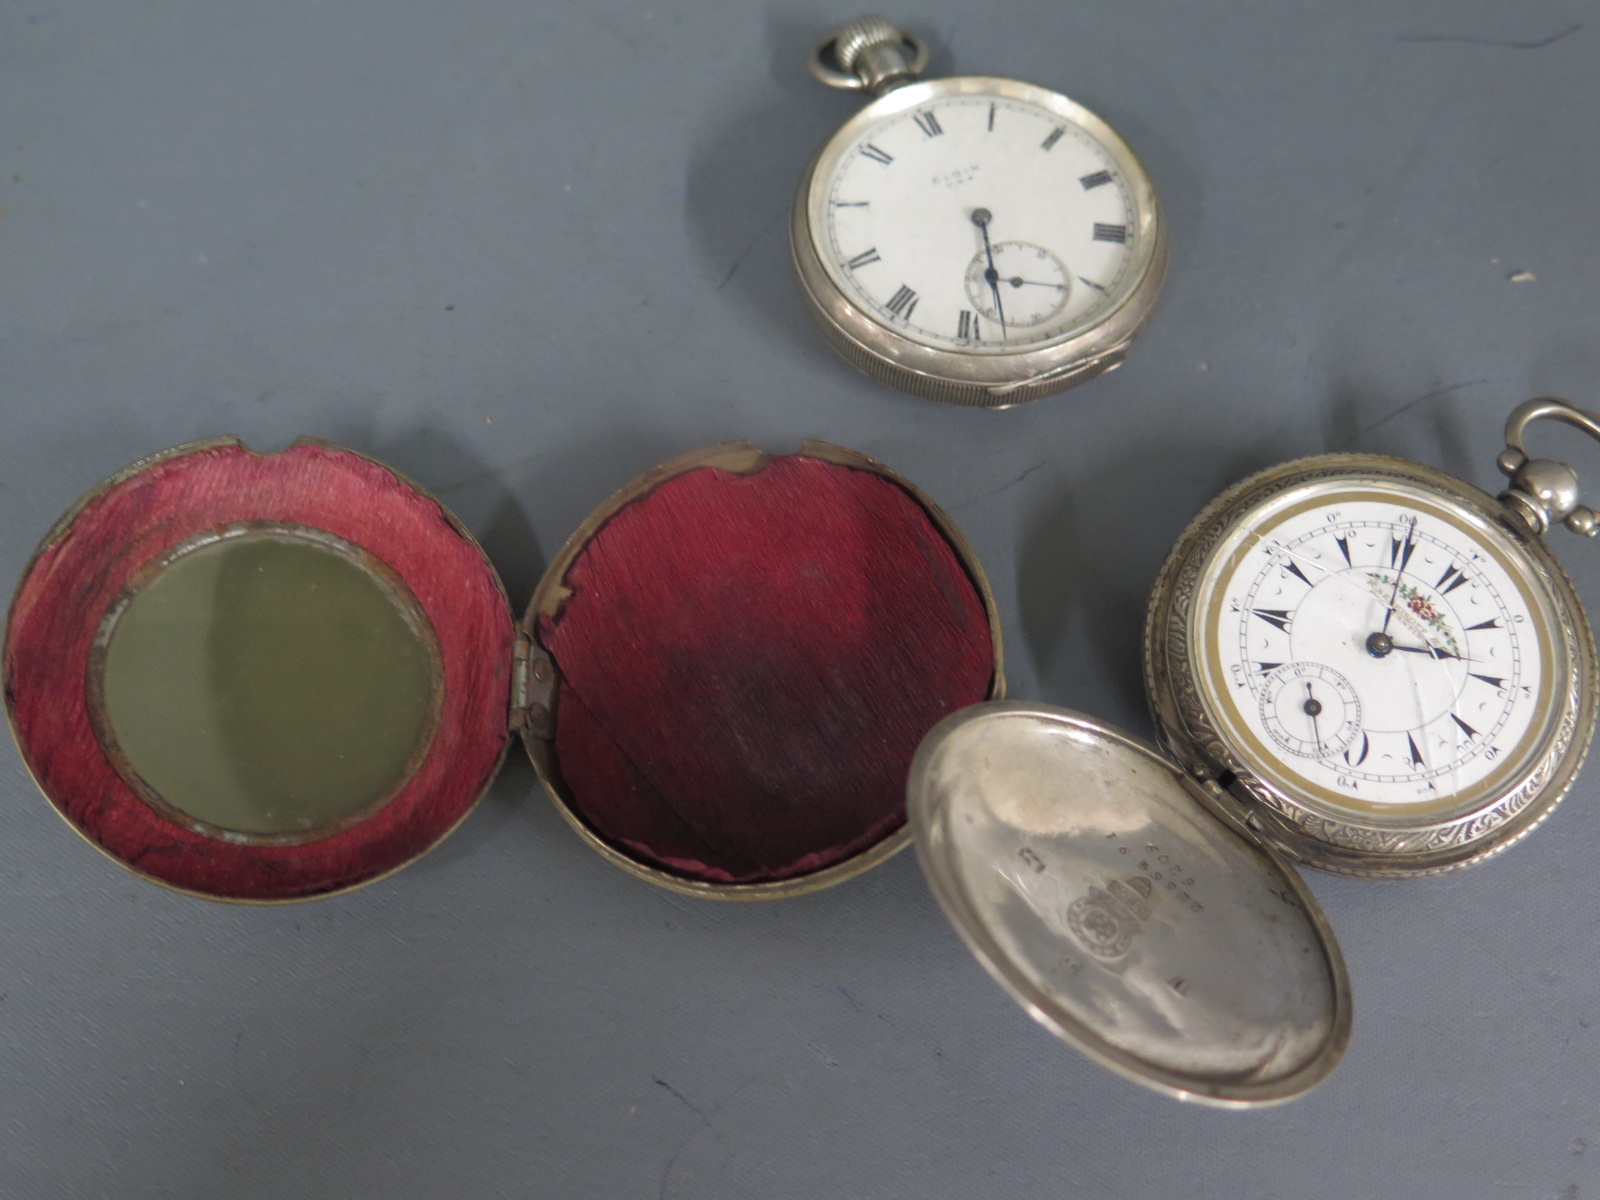 A silver pocket watch by Elgin and a Continental silver 800 pocket watch - both in need of some